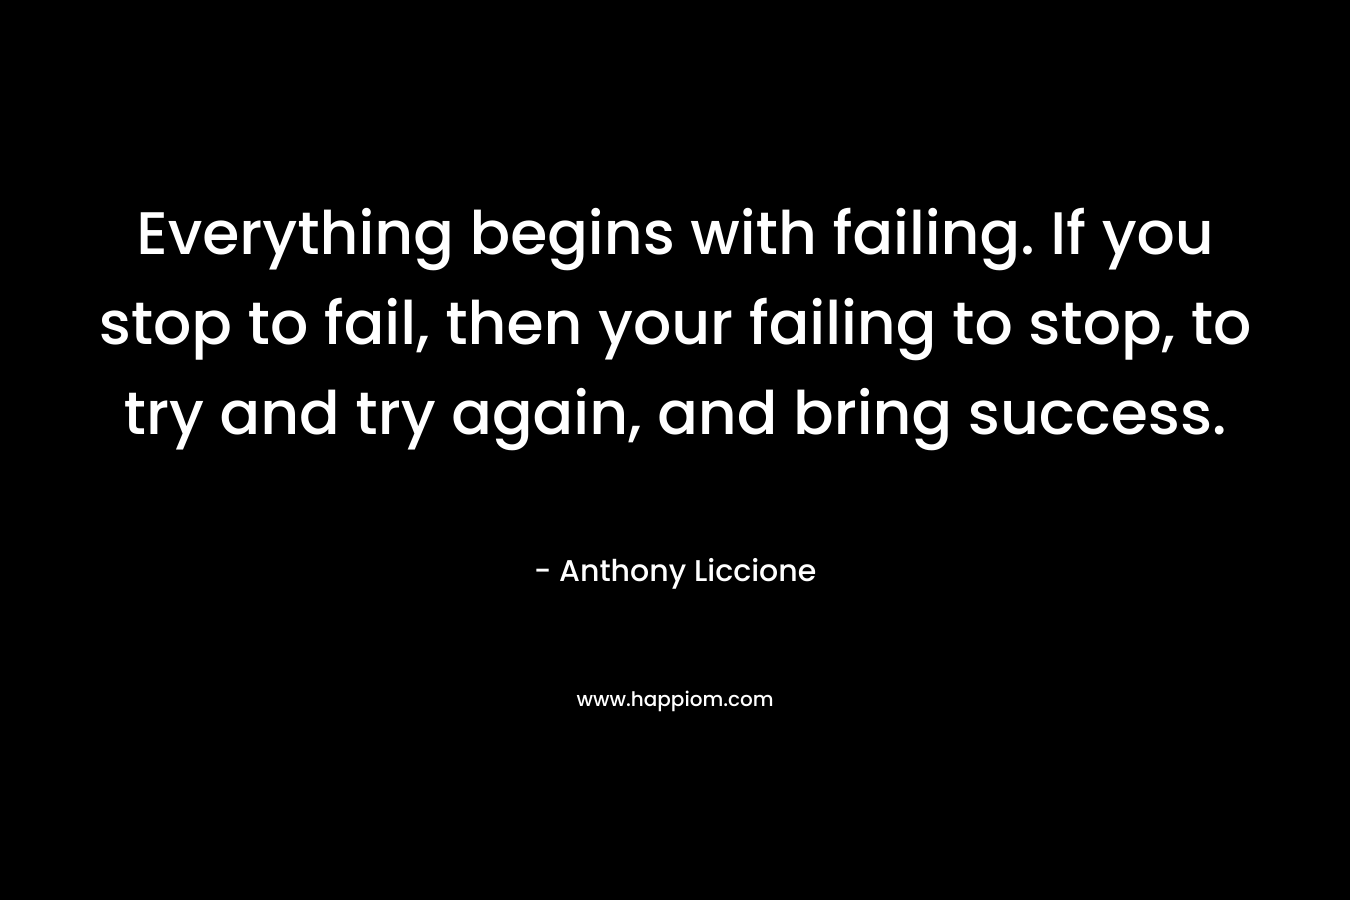 Everything begins with failing. If you stop to fail, then your failing to stop, to try and try again, and bring success.